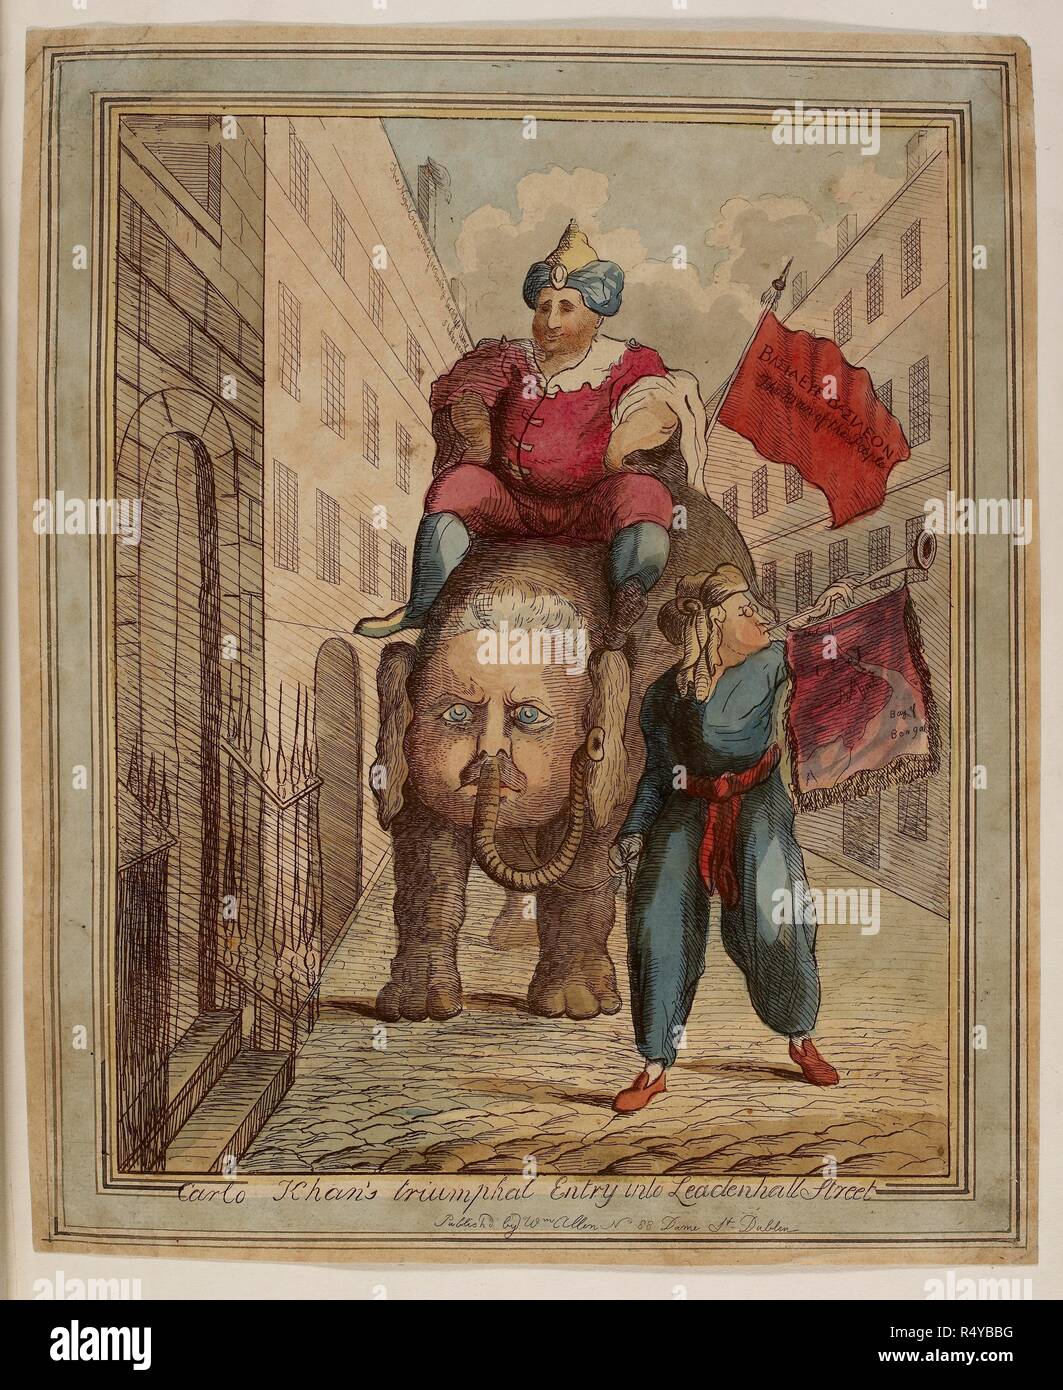 Carlo Khan's triumphal entry into Leadenhall street. 1783. This engraving appeared in December 1783, just after the Foreign Secretary Charles James Fox had published his India Bill. Fox is dressed in oriental costume and holds a flag inscribed 'King of Kings' in Greek. He rides an elephant on which Lord North's face is superimposed, representing the alliance of the two secretaries of state. Edmund Burke, the statesman and actual author of the 1783 India Bill, blows a bugle, proudly announcing their arrival at the East India Company's headquarters in Leadenhall Street. Only the raven, sitting o Stock Photo